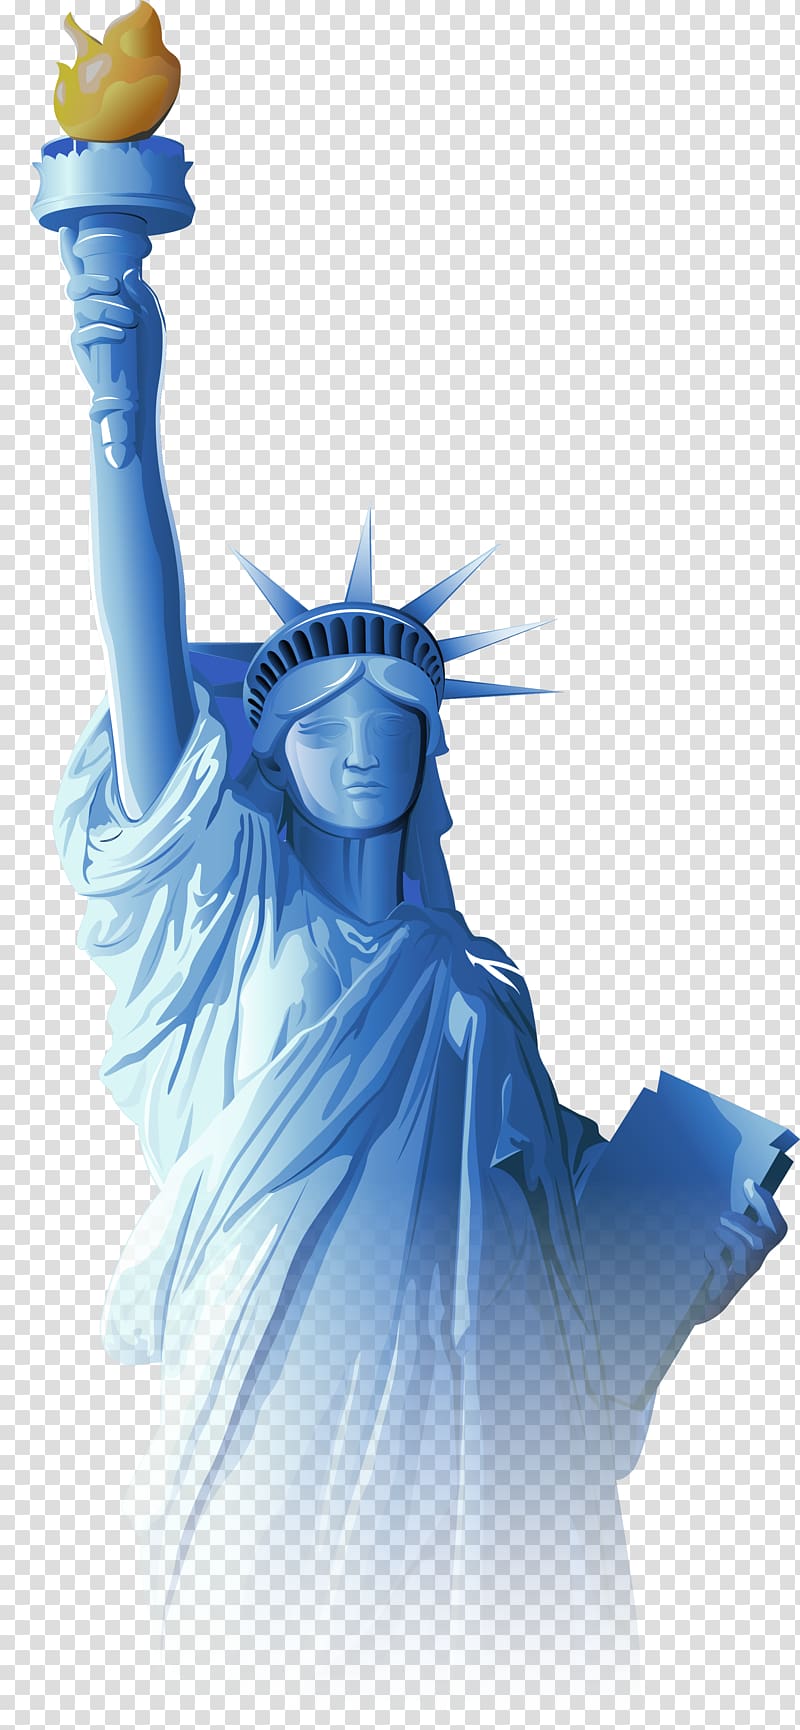 Statue of Liberty Infographic, statue of liberty transparent background PNG clipart